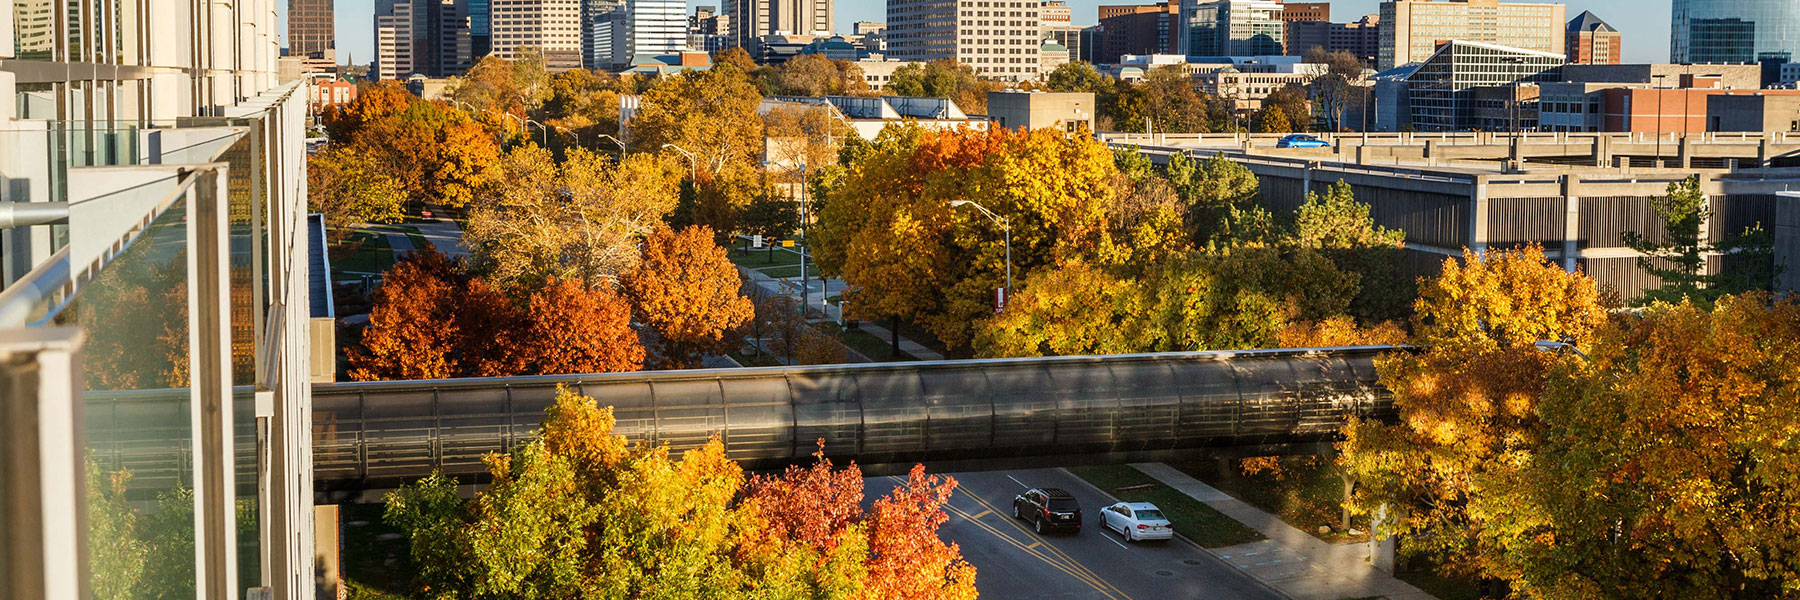 Fall leaves on IUPUI campus with skywalk and city in background